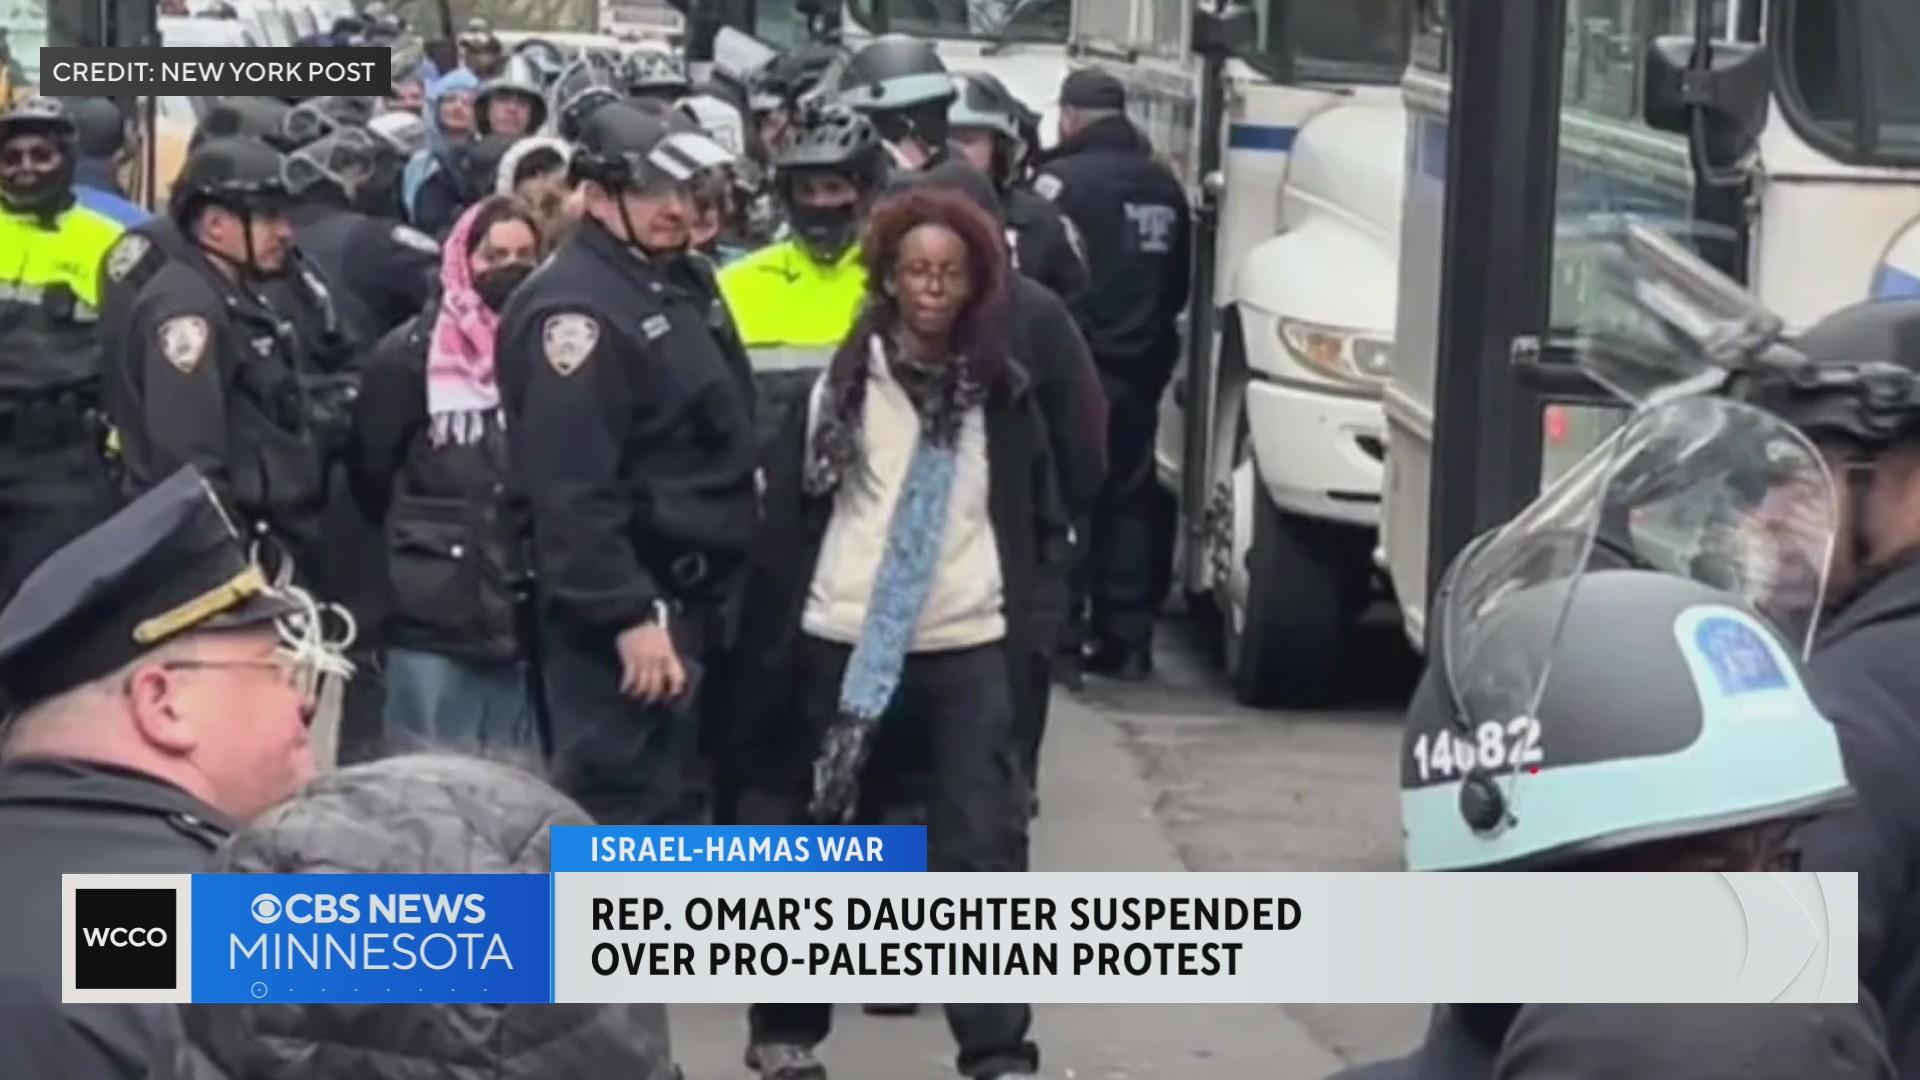 Ilhan Omar's daughter says she was suspended from college after pro-Palestinian protest at Columbia